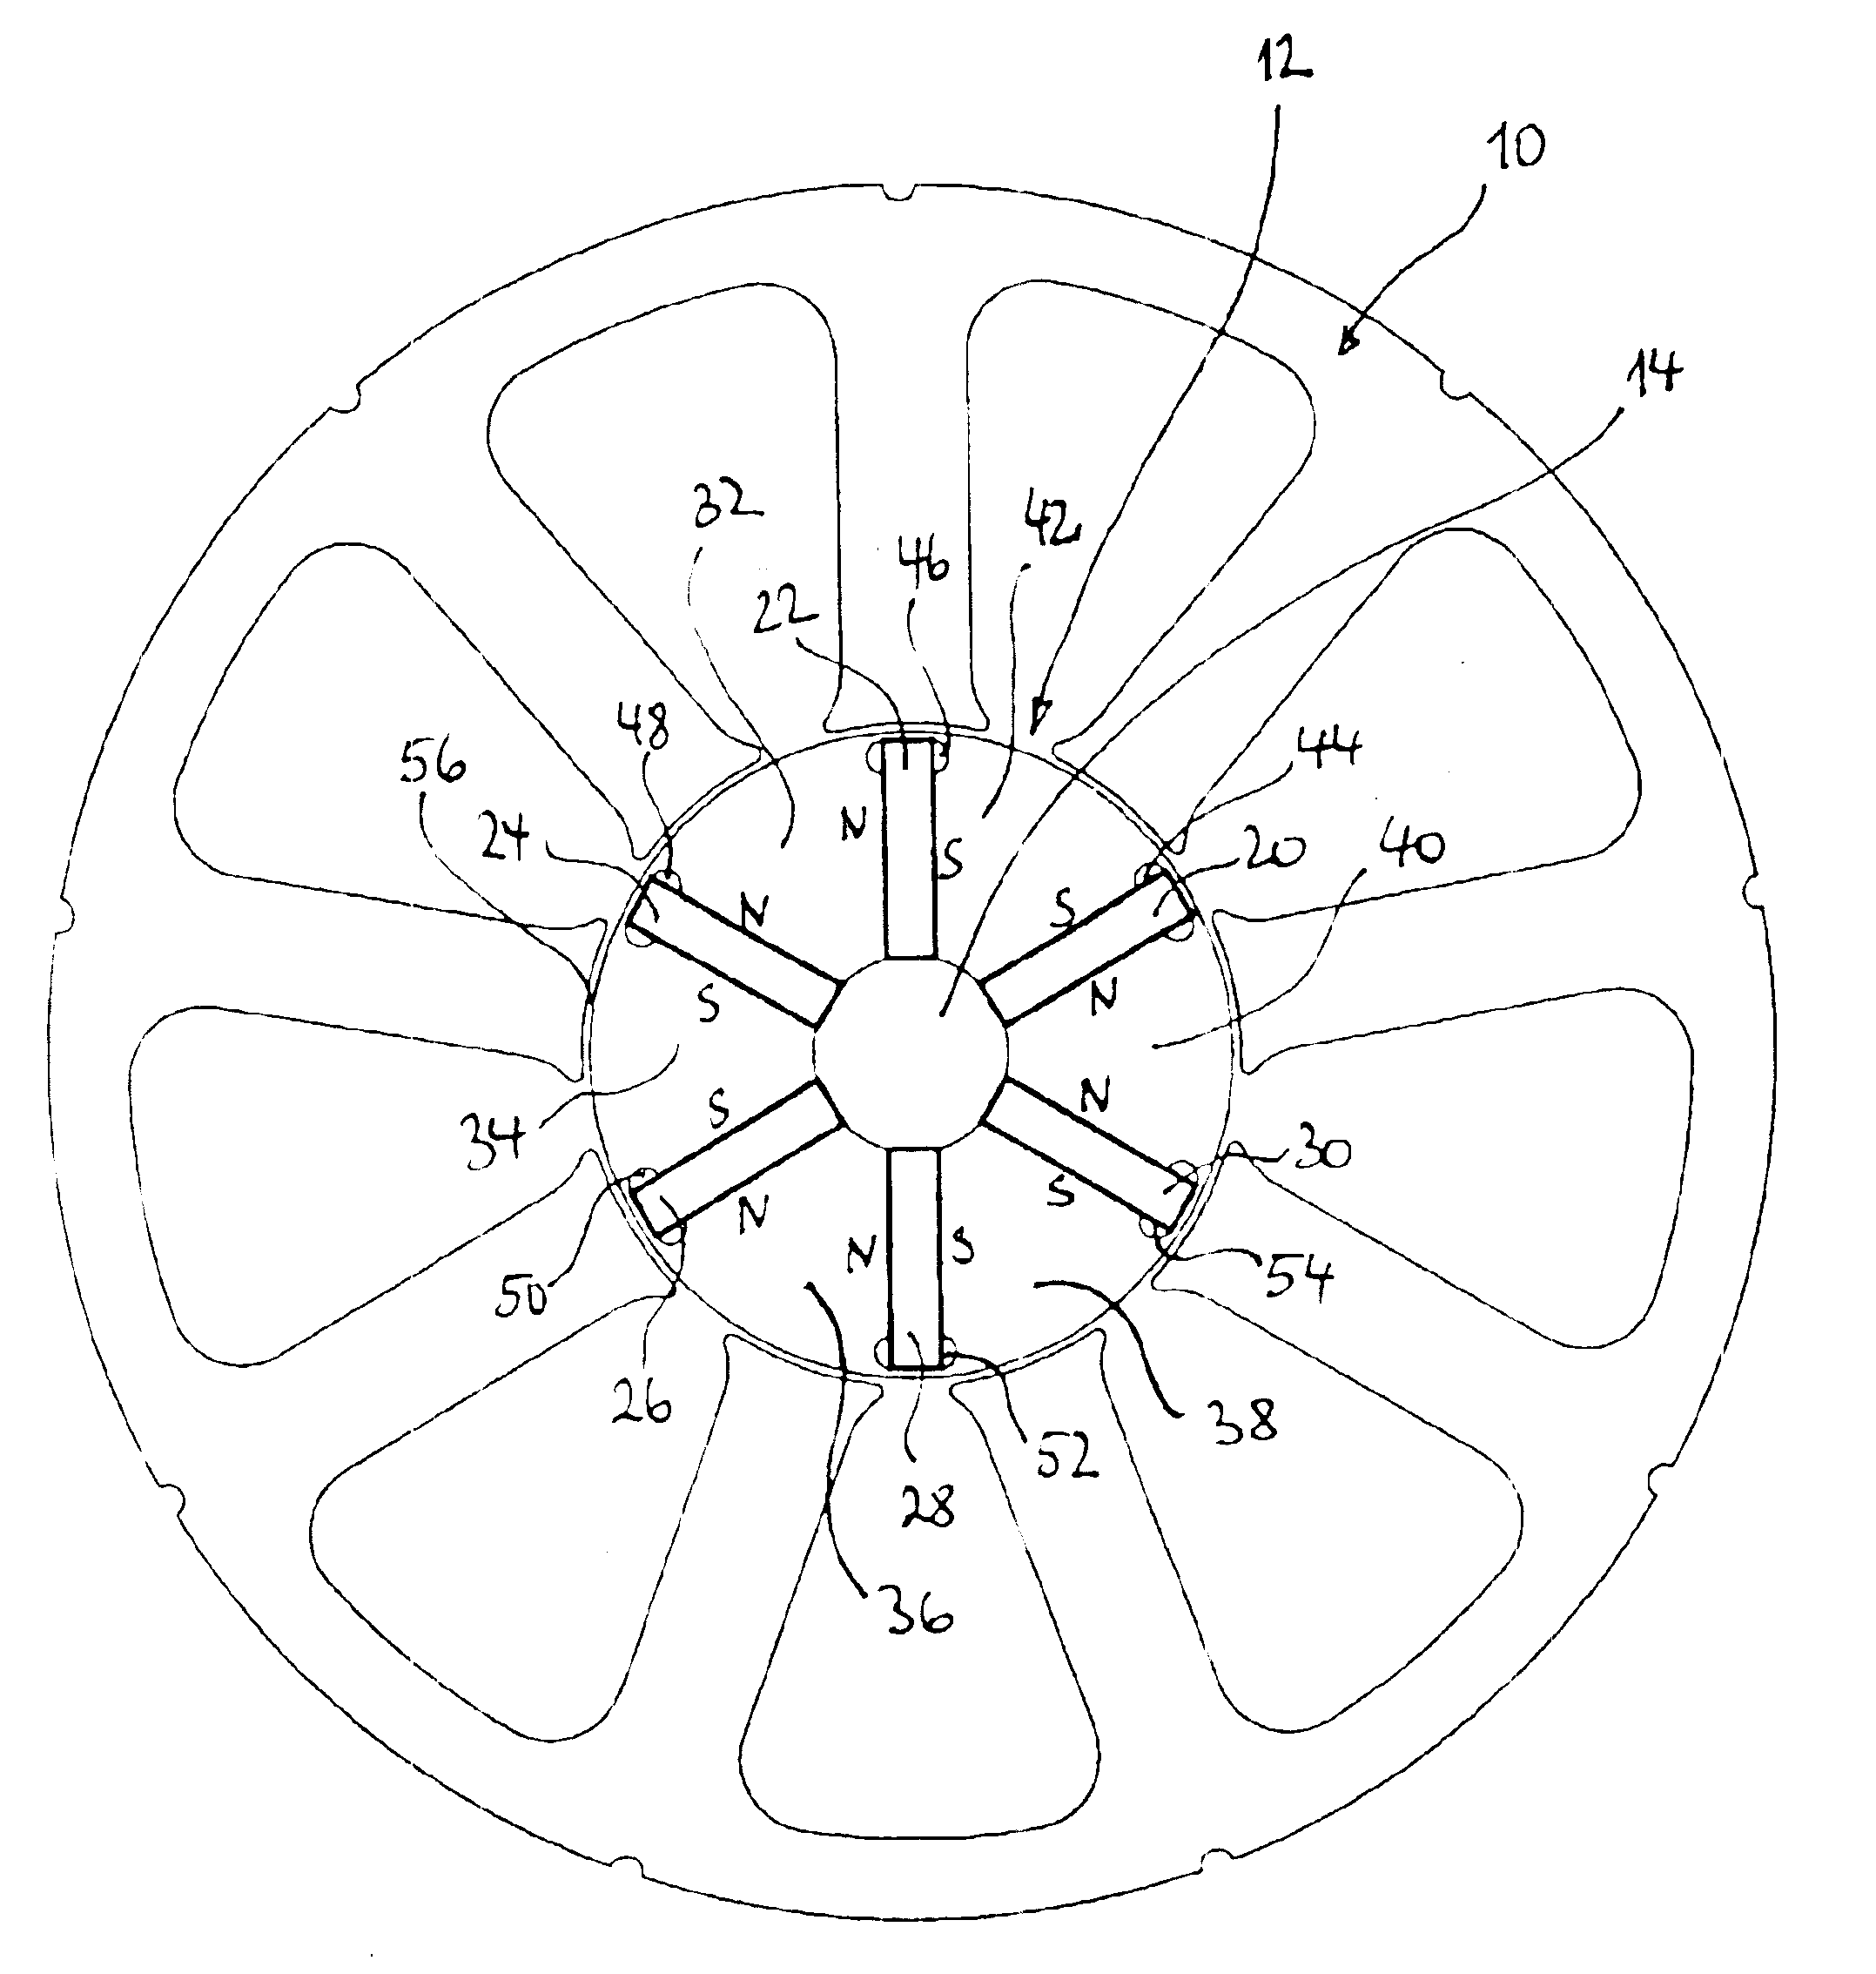 Rotor assembly for a permanent magnet electrical machine comprising such a rotor assembly